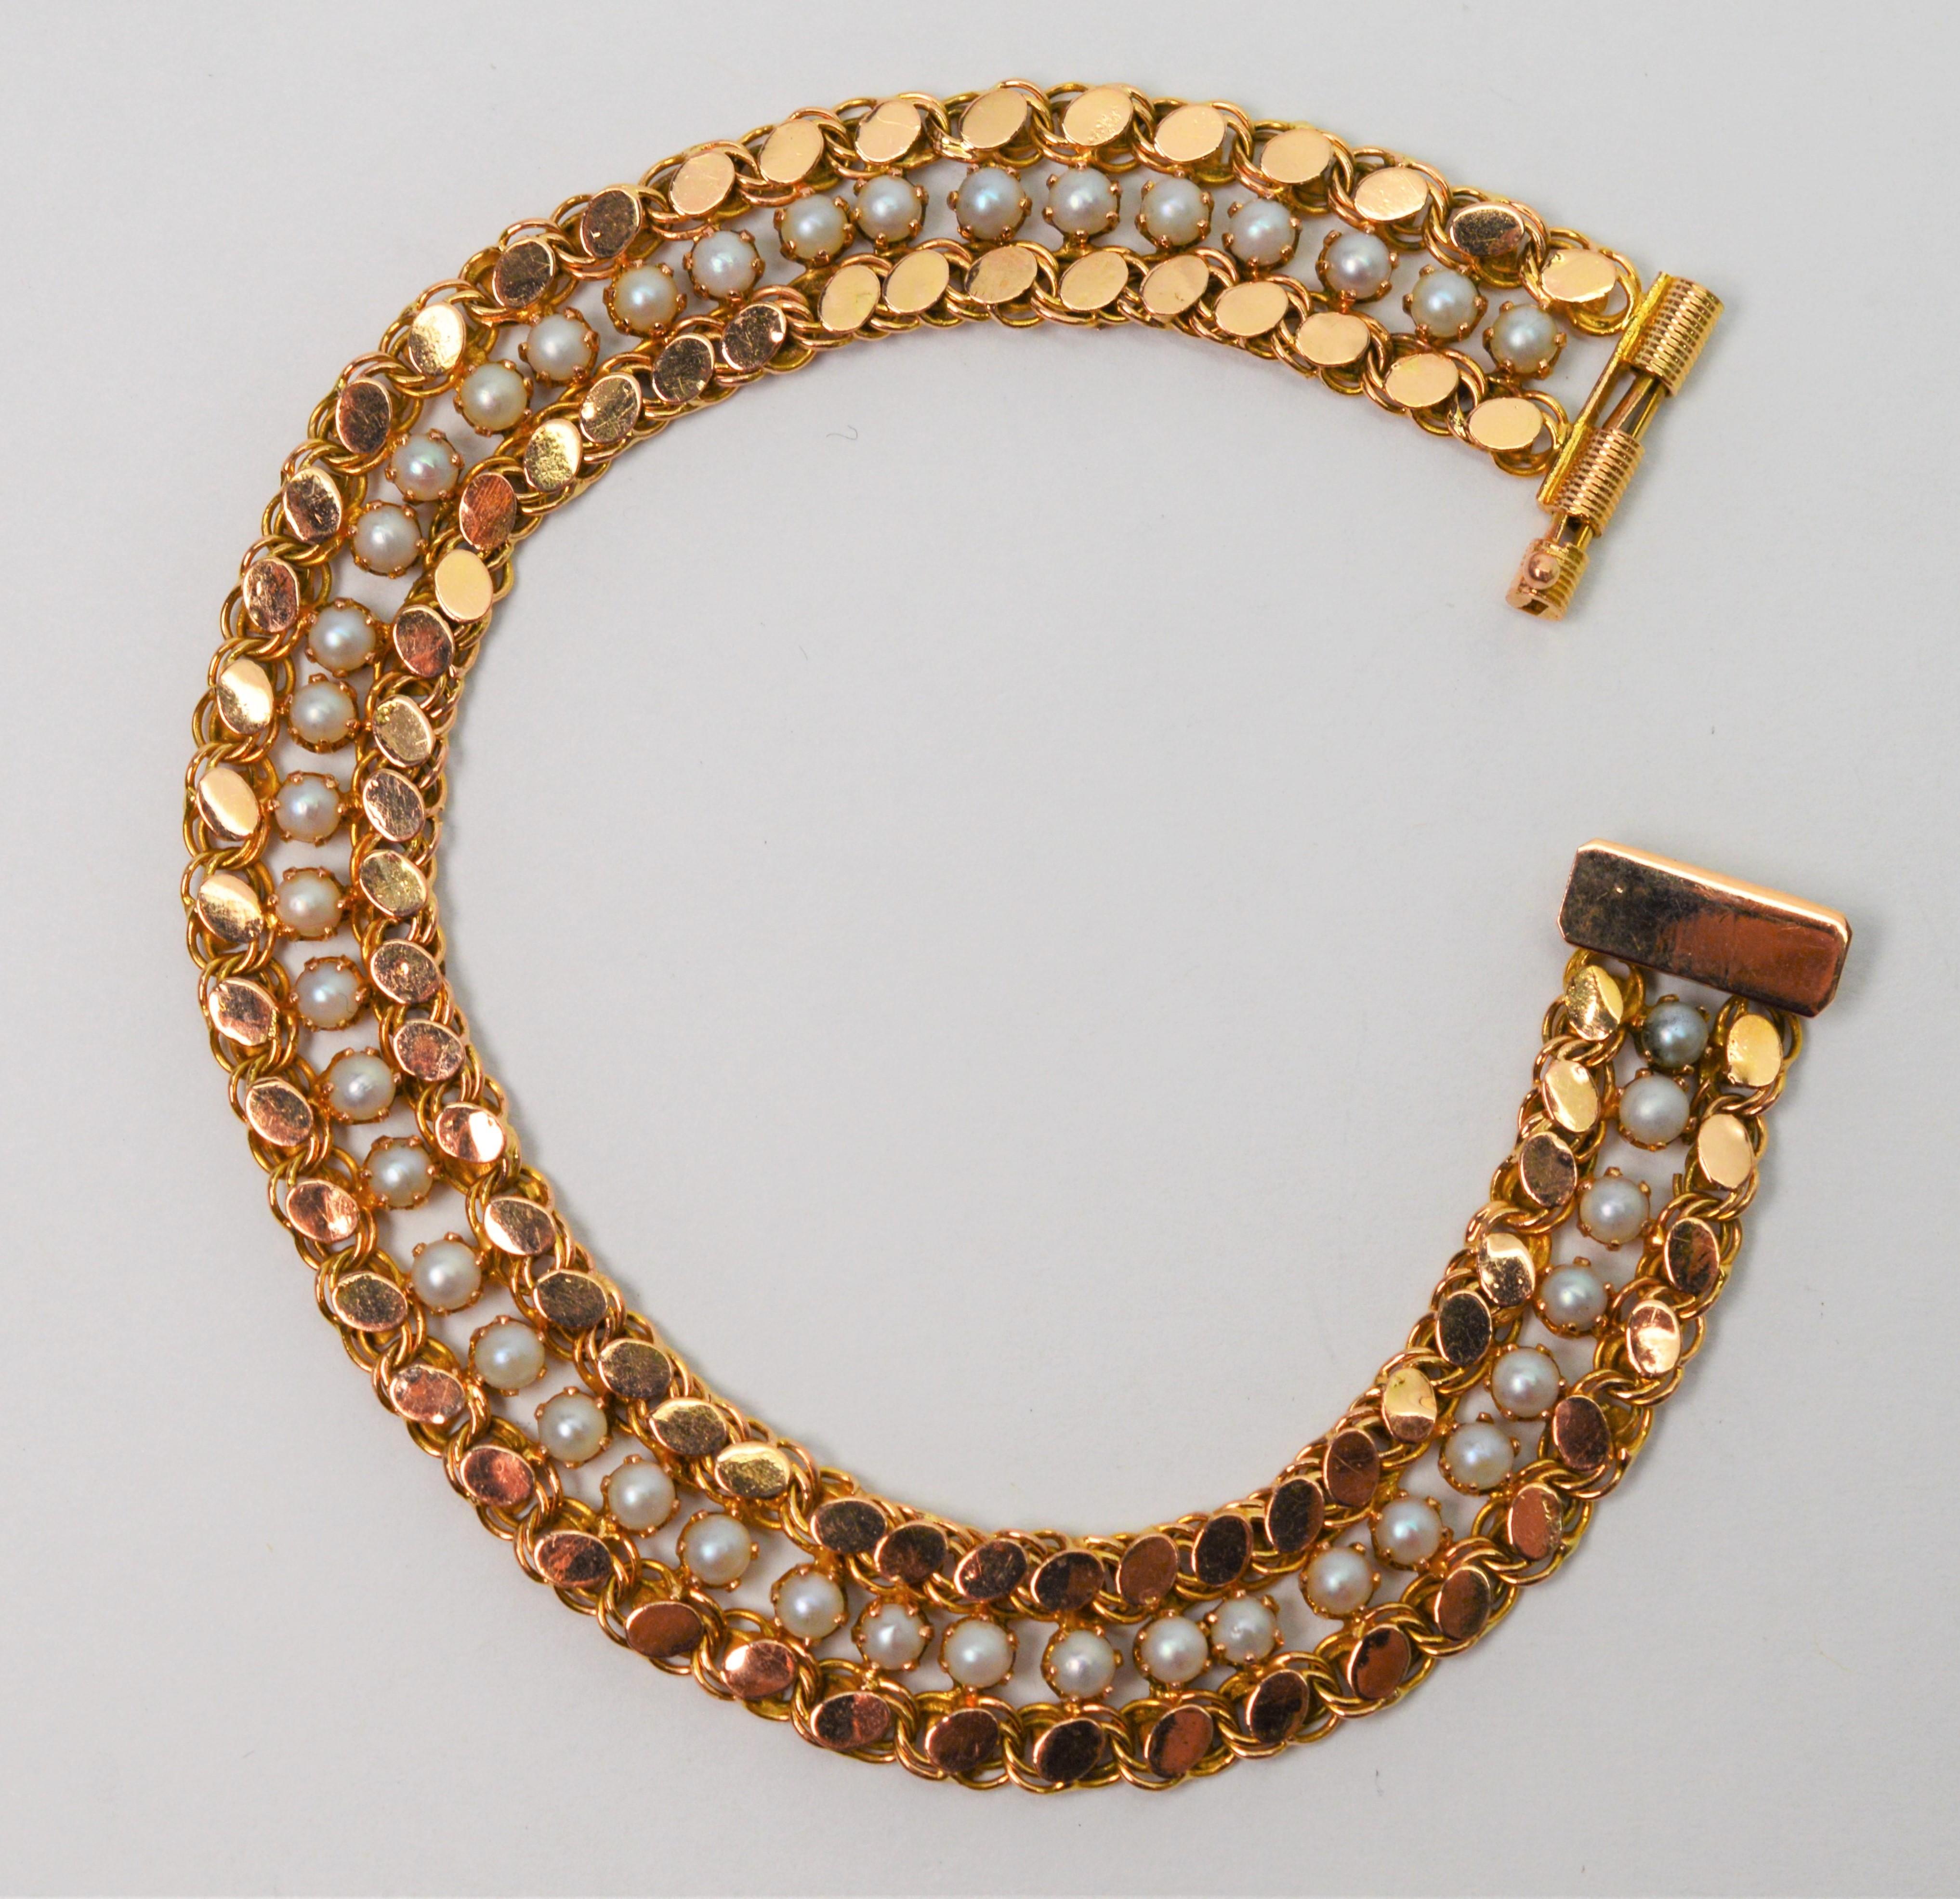 Pearl Accented 14 Karat Yellow Gold Link Bracelet In Good Condition For Sale In Mount Kisco, NY